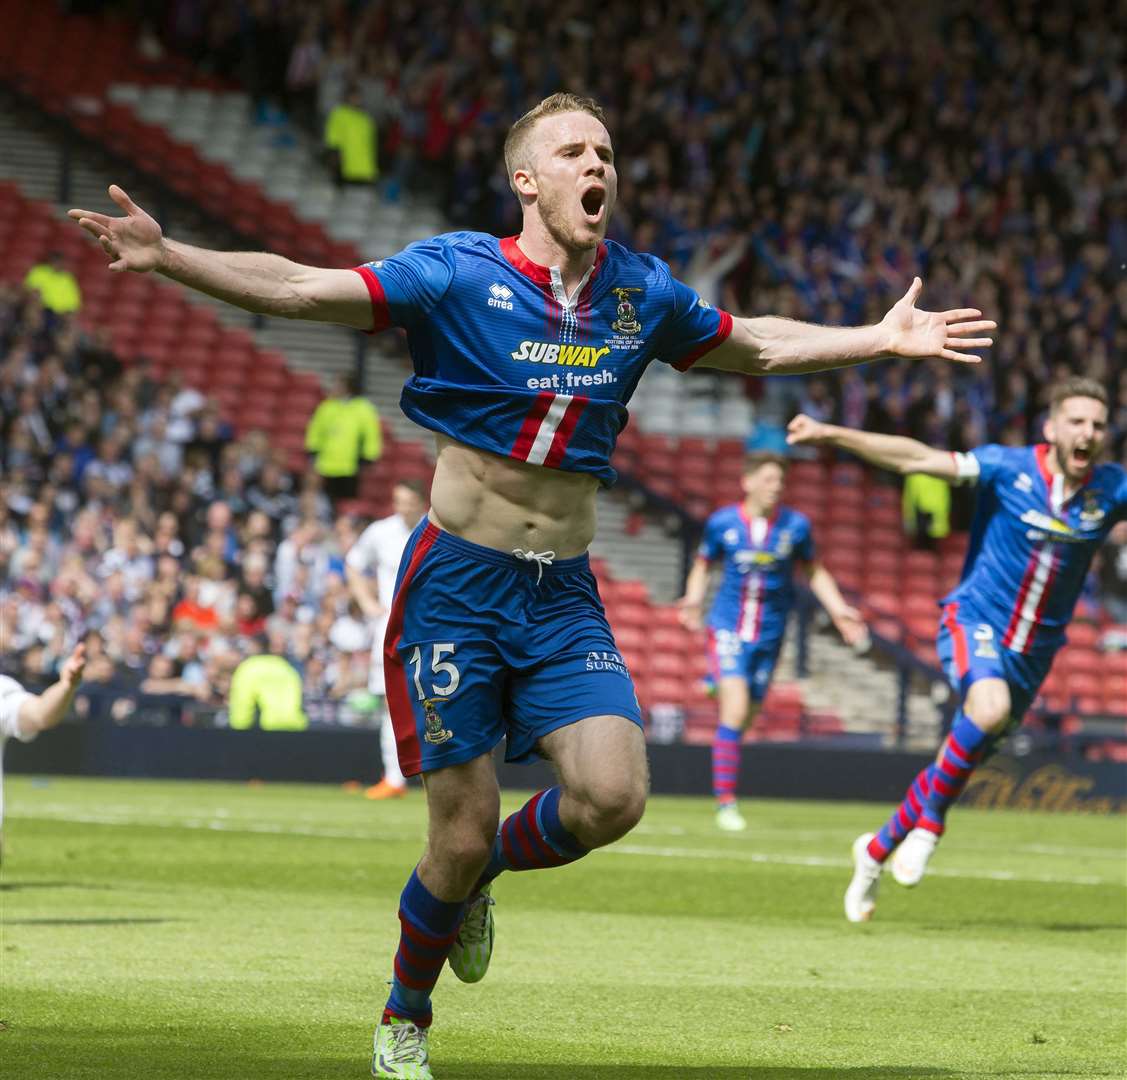 Picture - Ken Macpherson, Inverness. Scottish Cup Final. Inverness CT(2) v Falkirk(1). 30.05.15. ICT's Marley Watkins celebrates after scoring the opening goal.